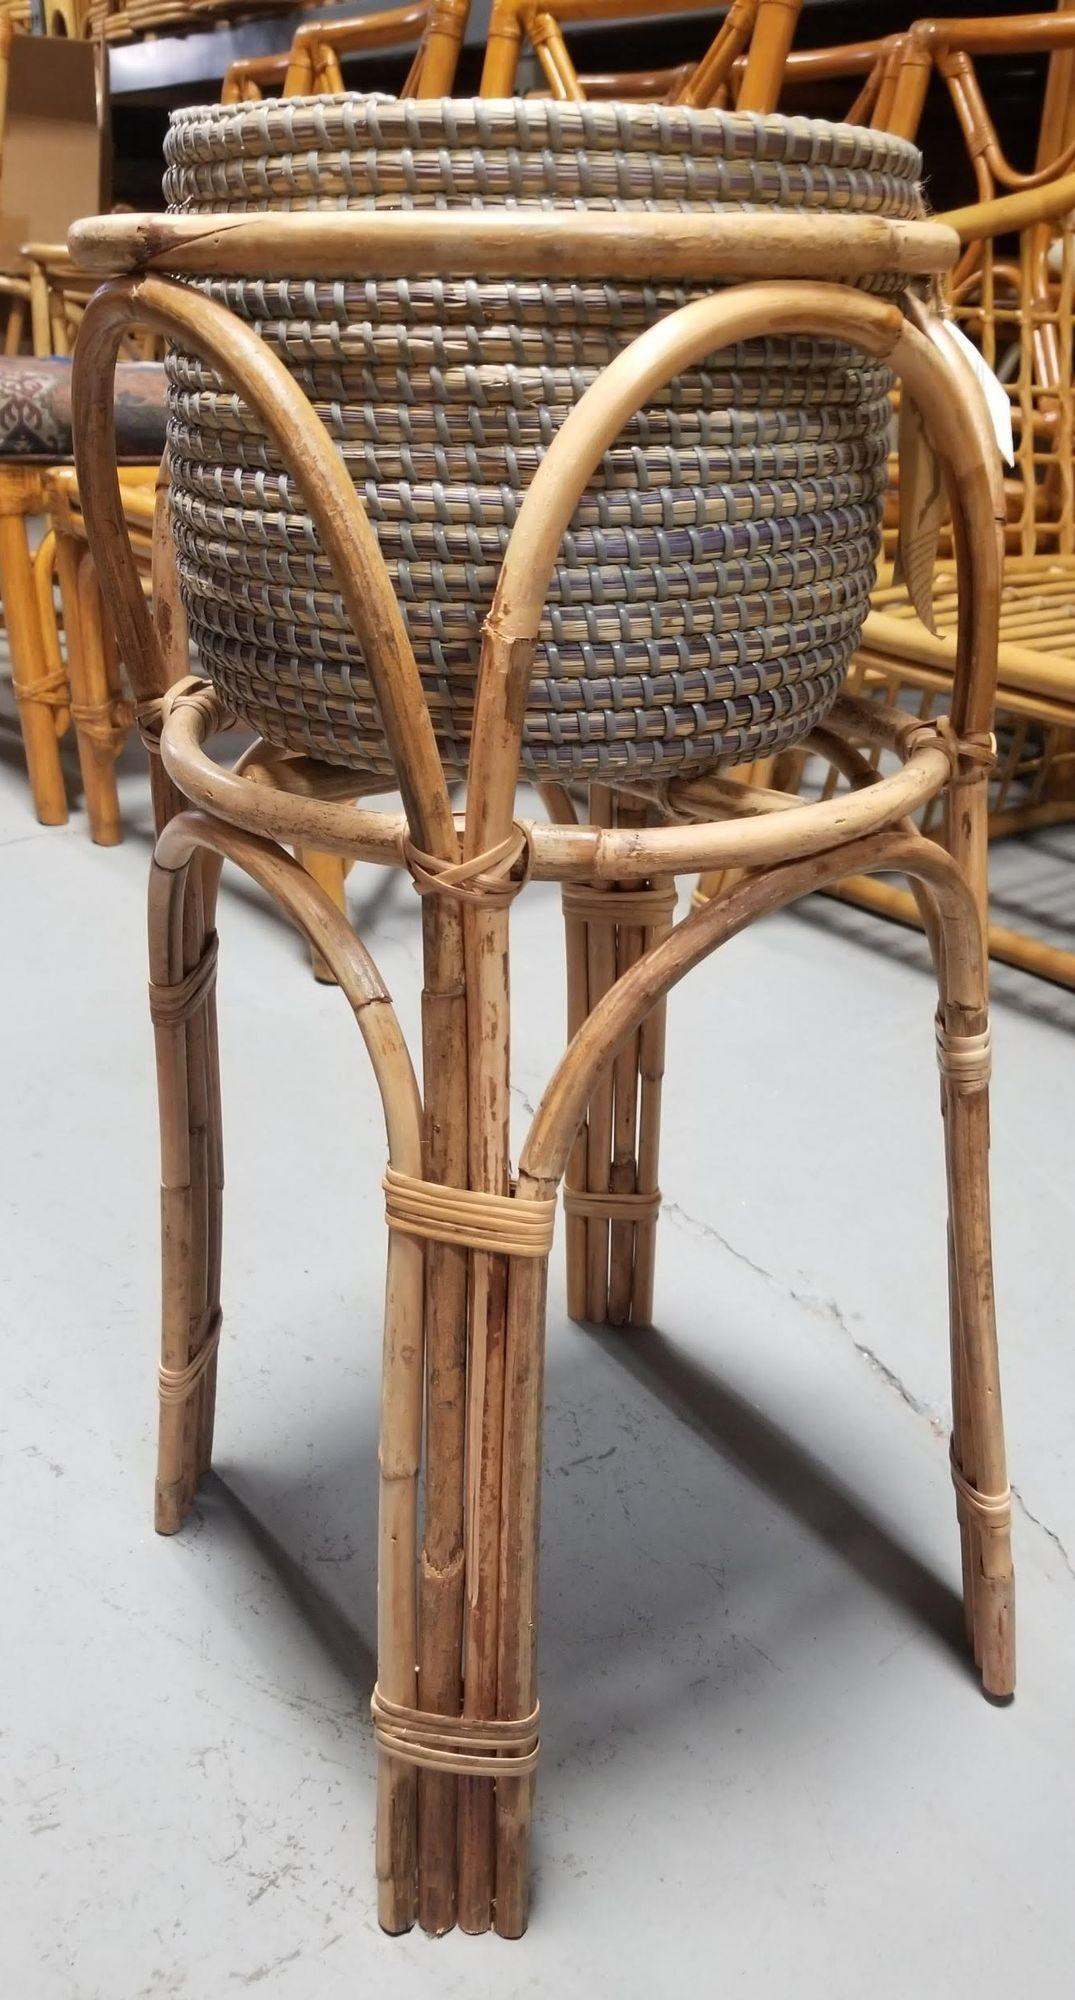 Restored rattan plant stand with a stone grey woven basket planter perfect for your indoor plant.

Circa 1950s.

We only purchase and sell only the best and finest rattan furniture made by the best and most well-known American designers and